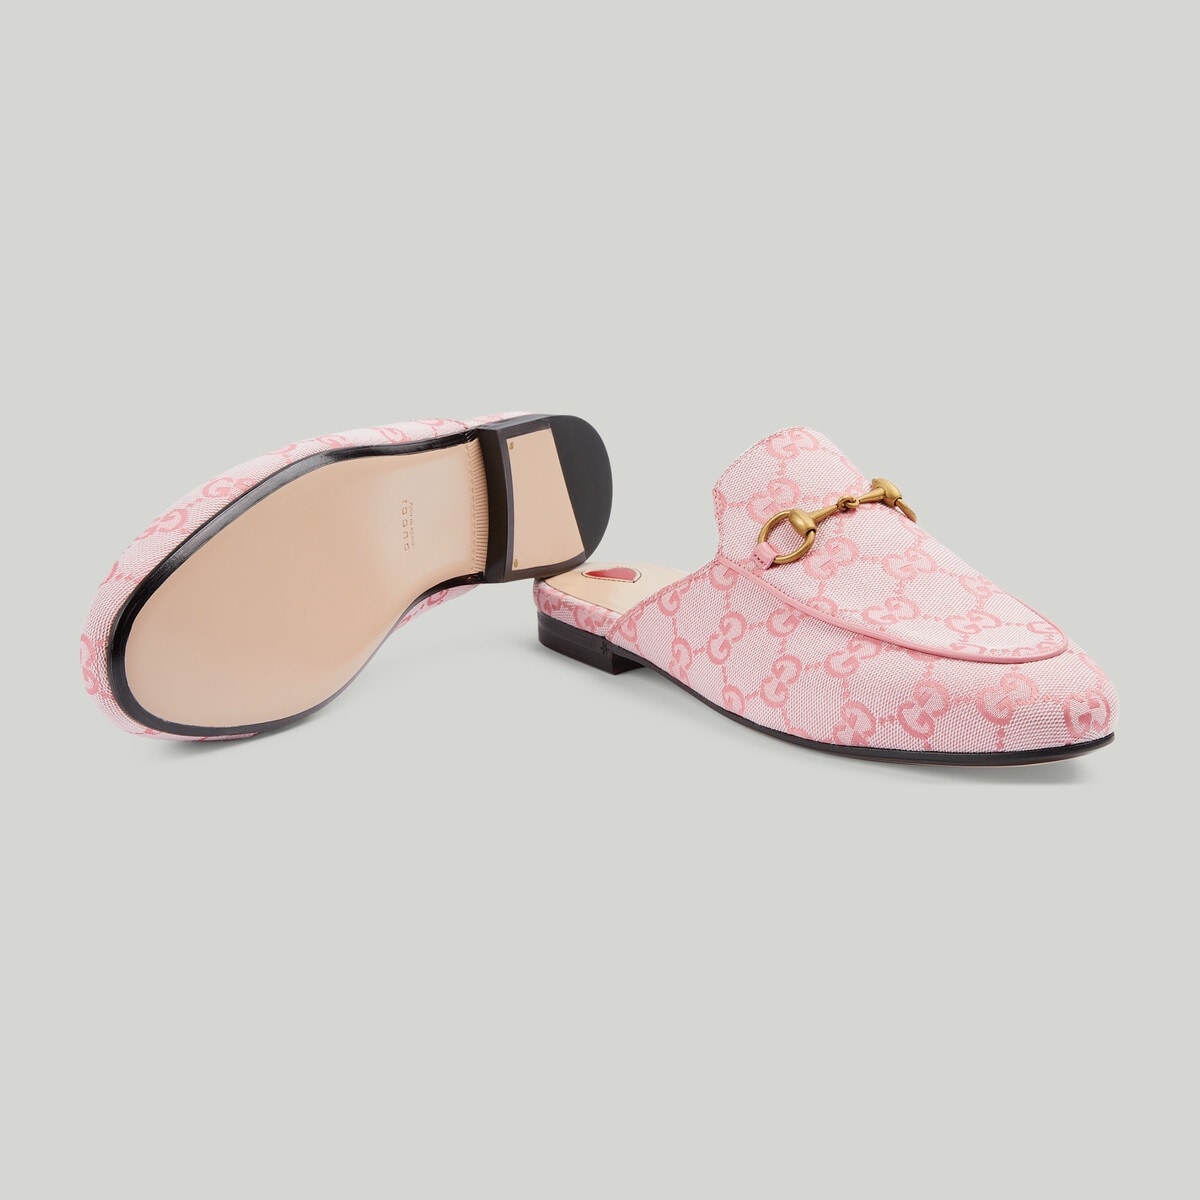 Women's Princetown slipper with GG - 5